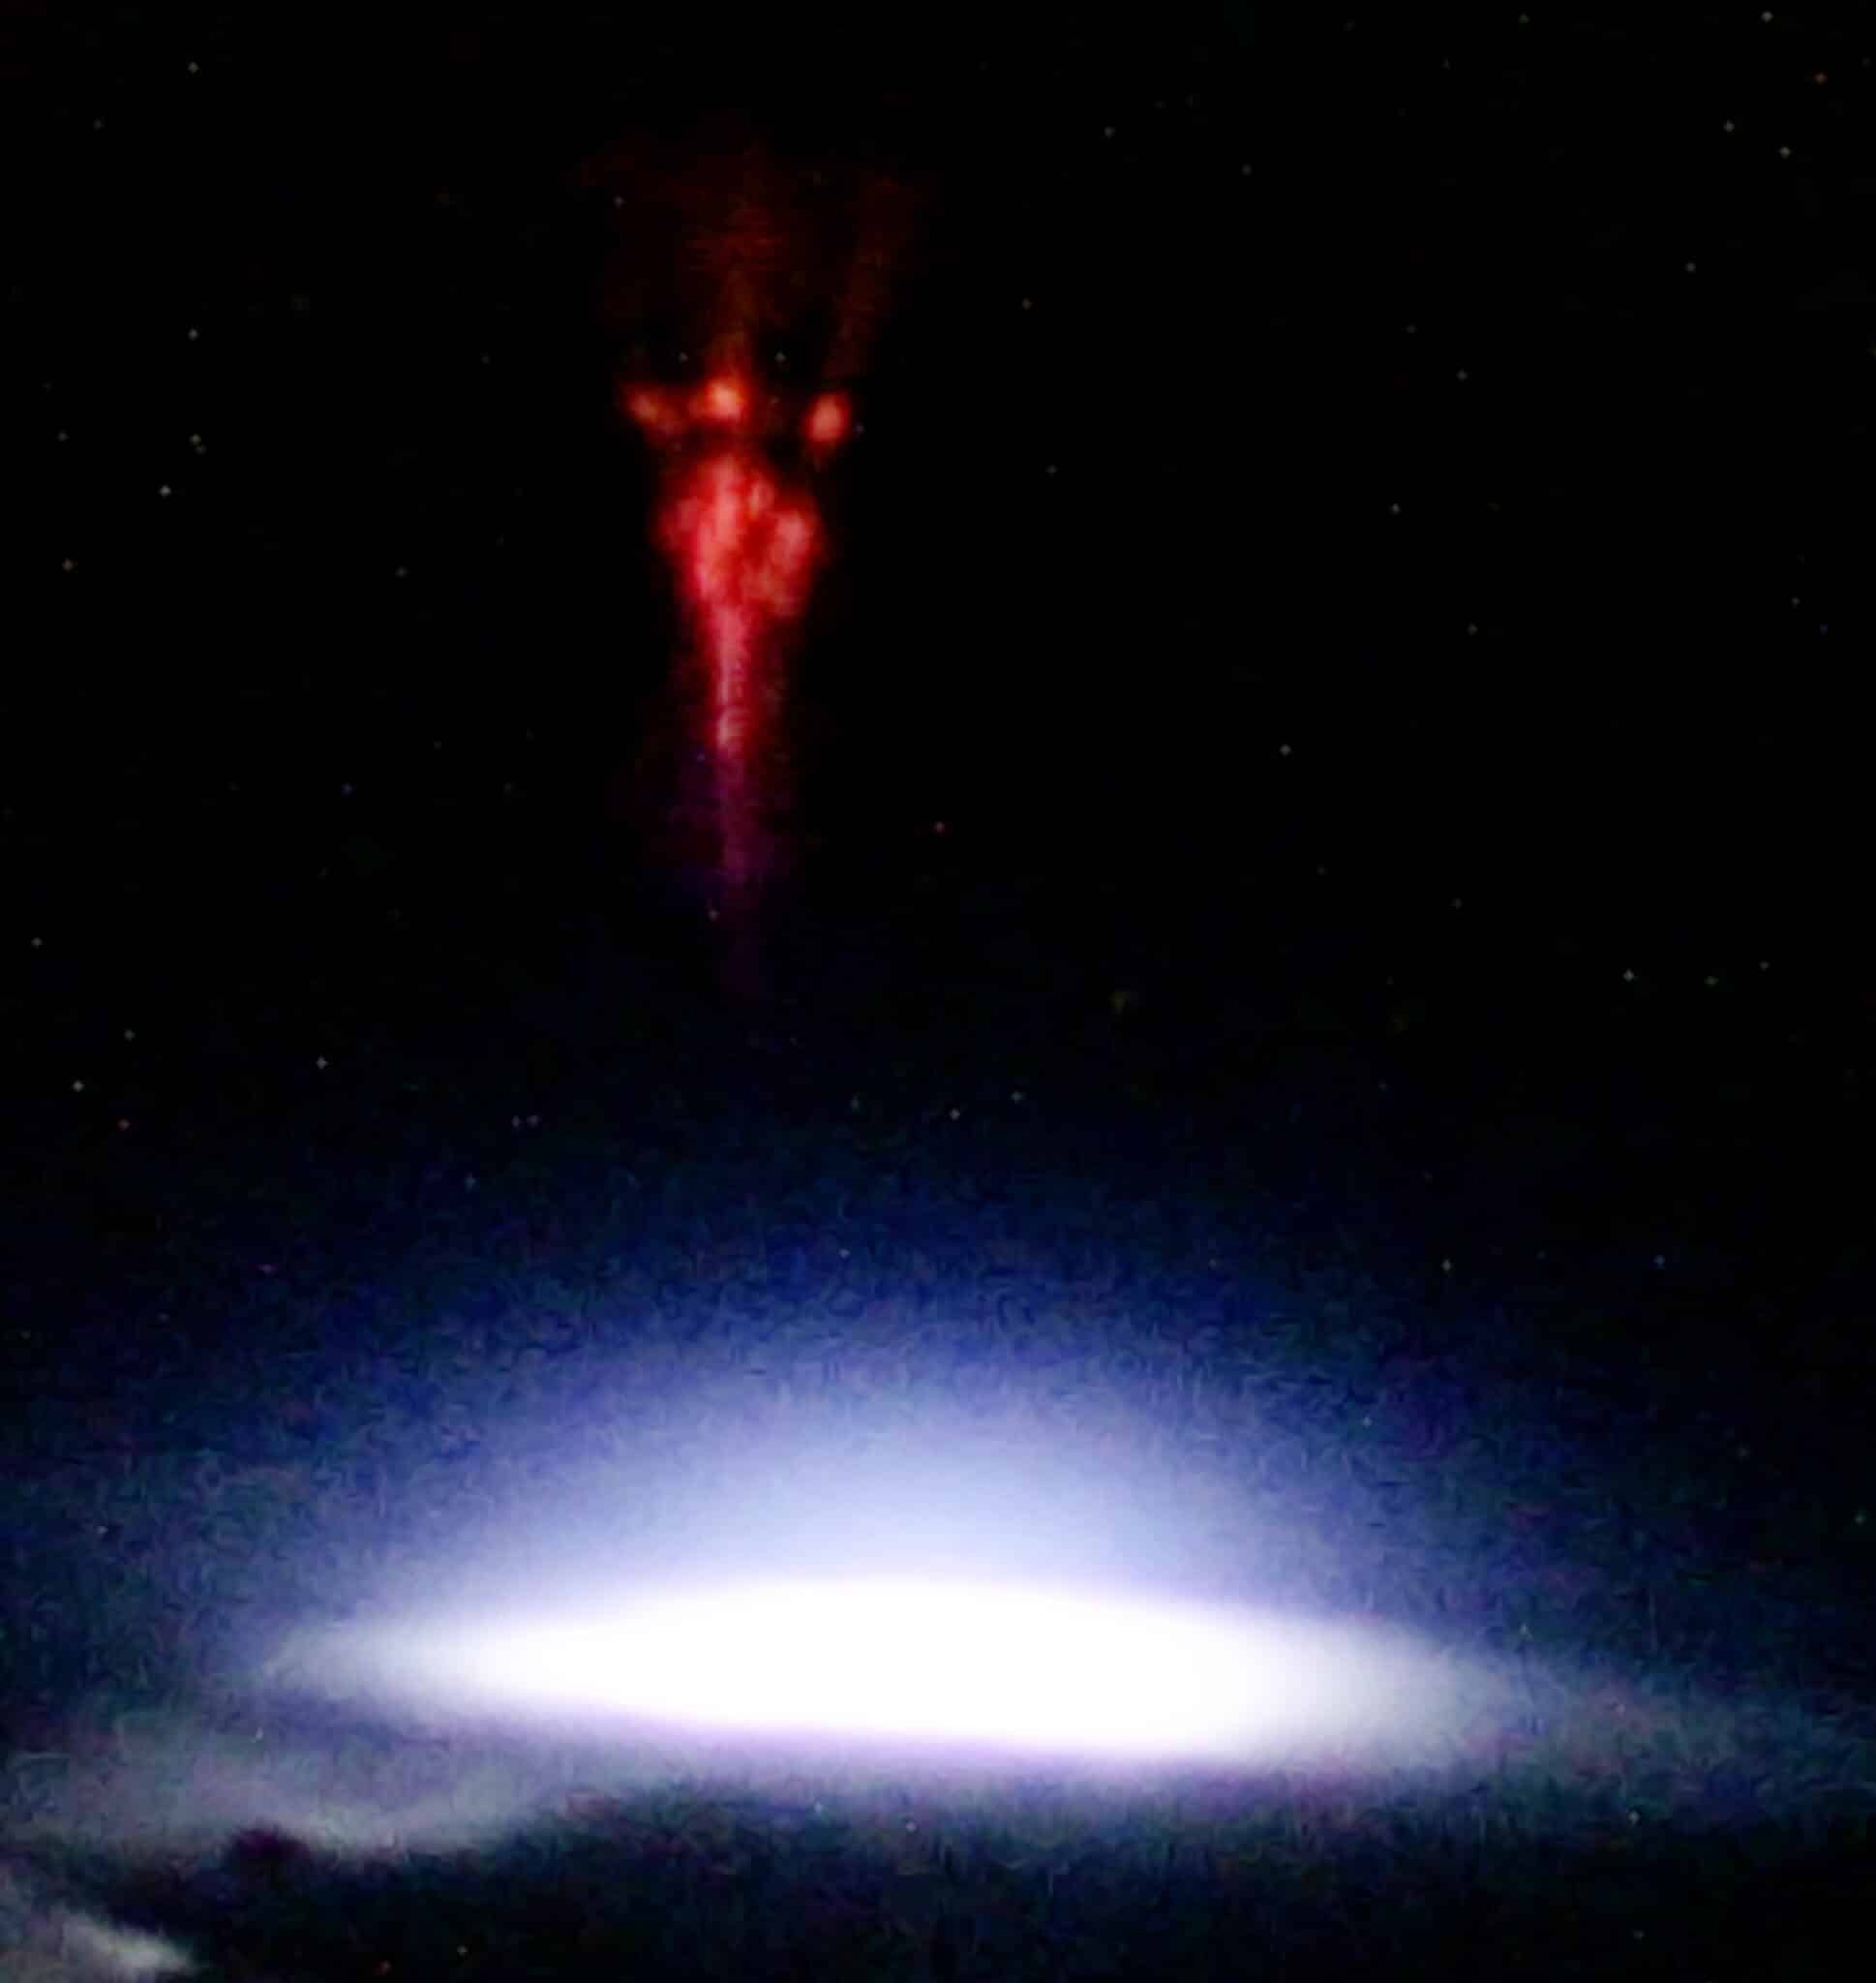 The red sprite appears above a thundercloud for only a fraction of a second, which is why the event-based Davis camera is needed to catch the fast lightning.